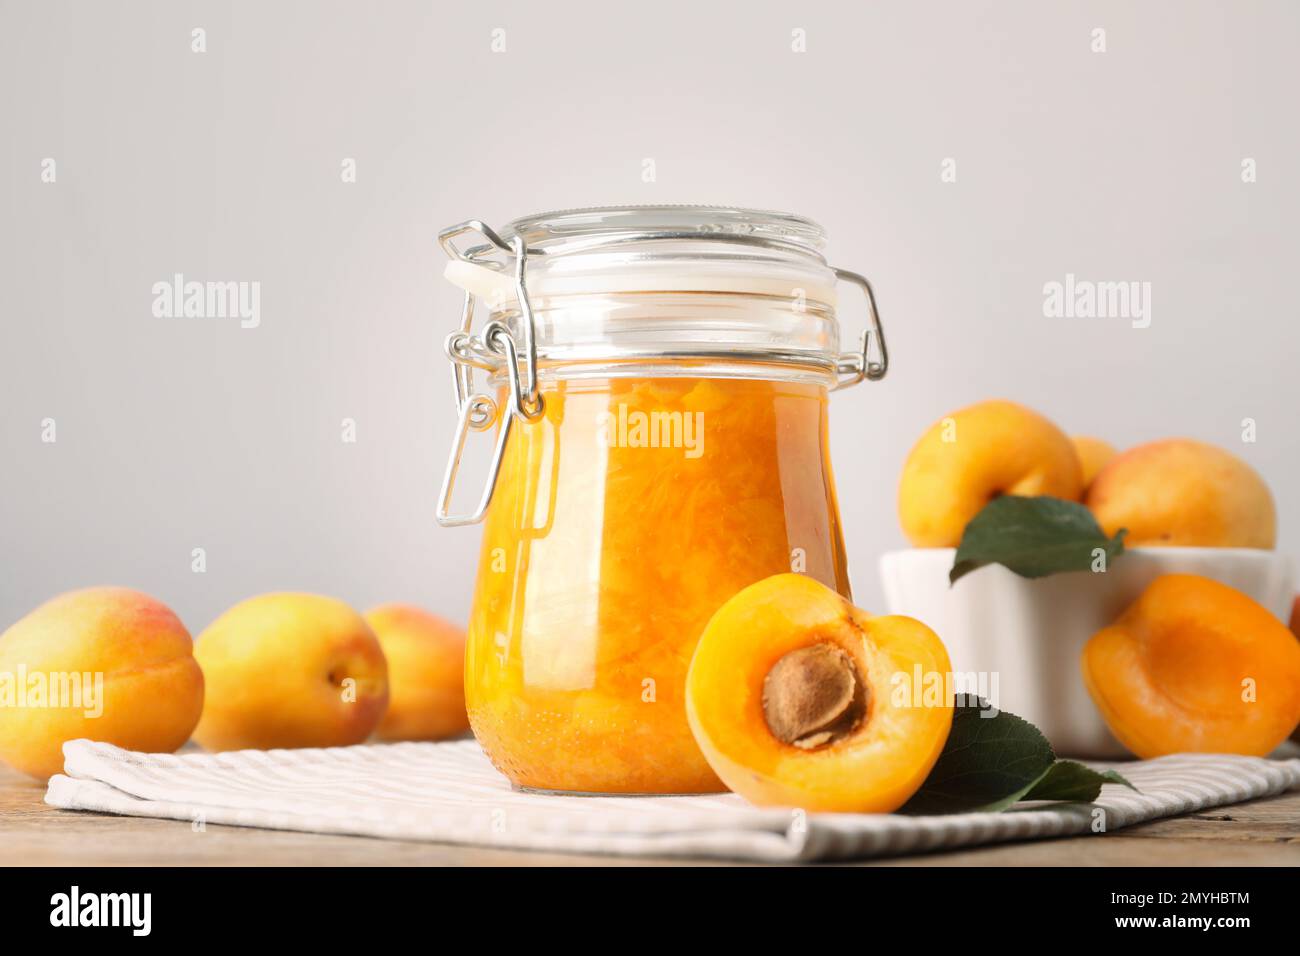 Jar of apricot jam and fresh fruits on table Stock Photo